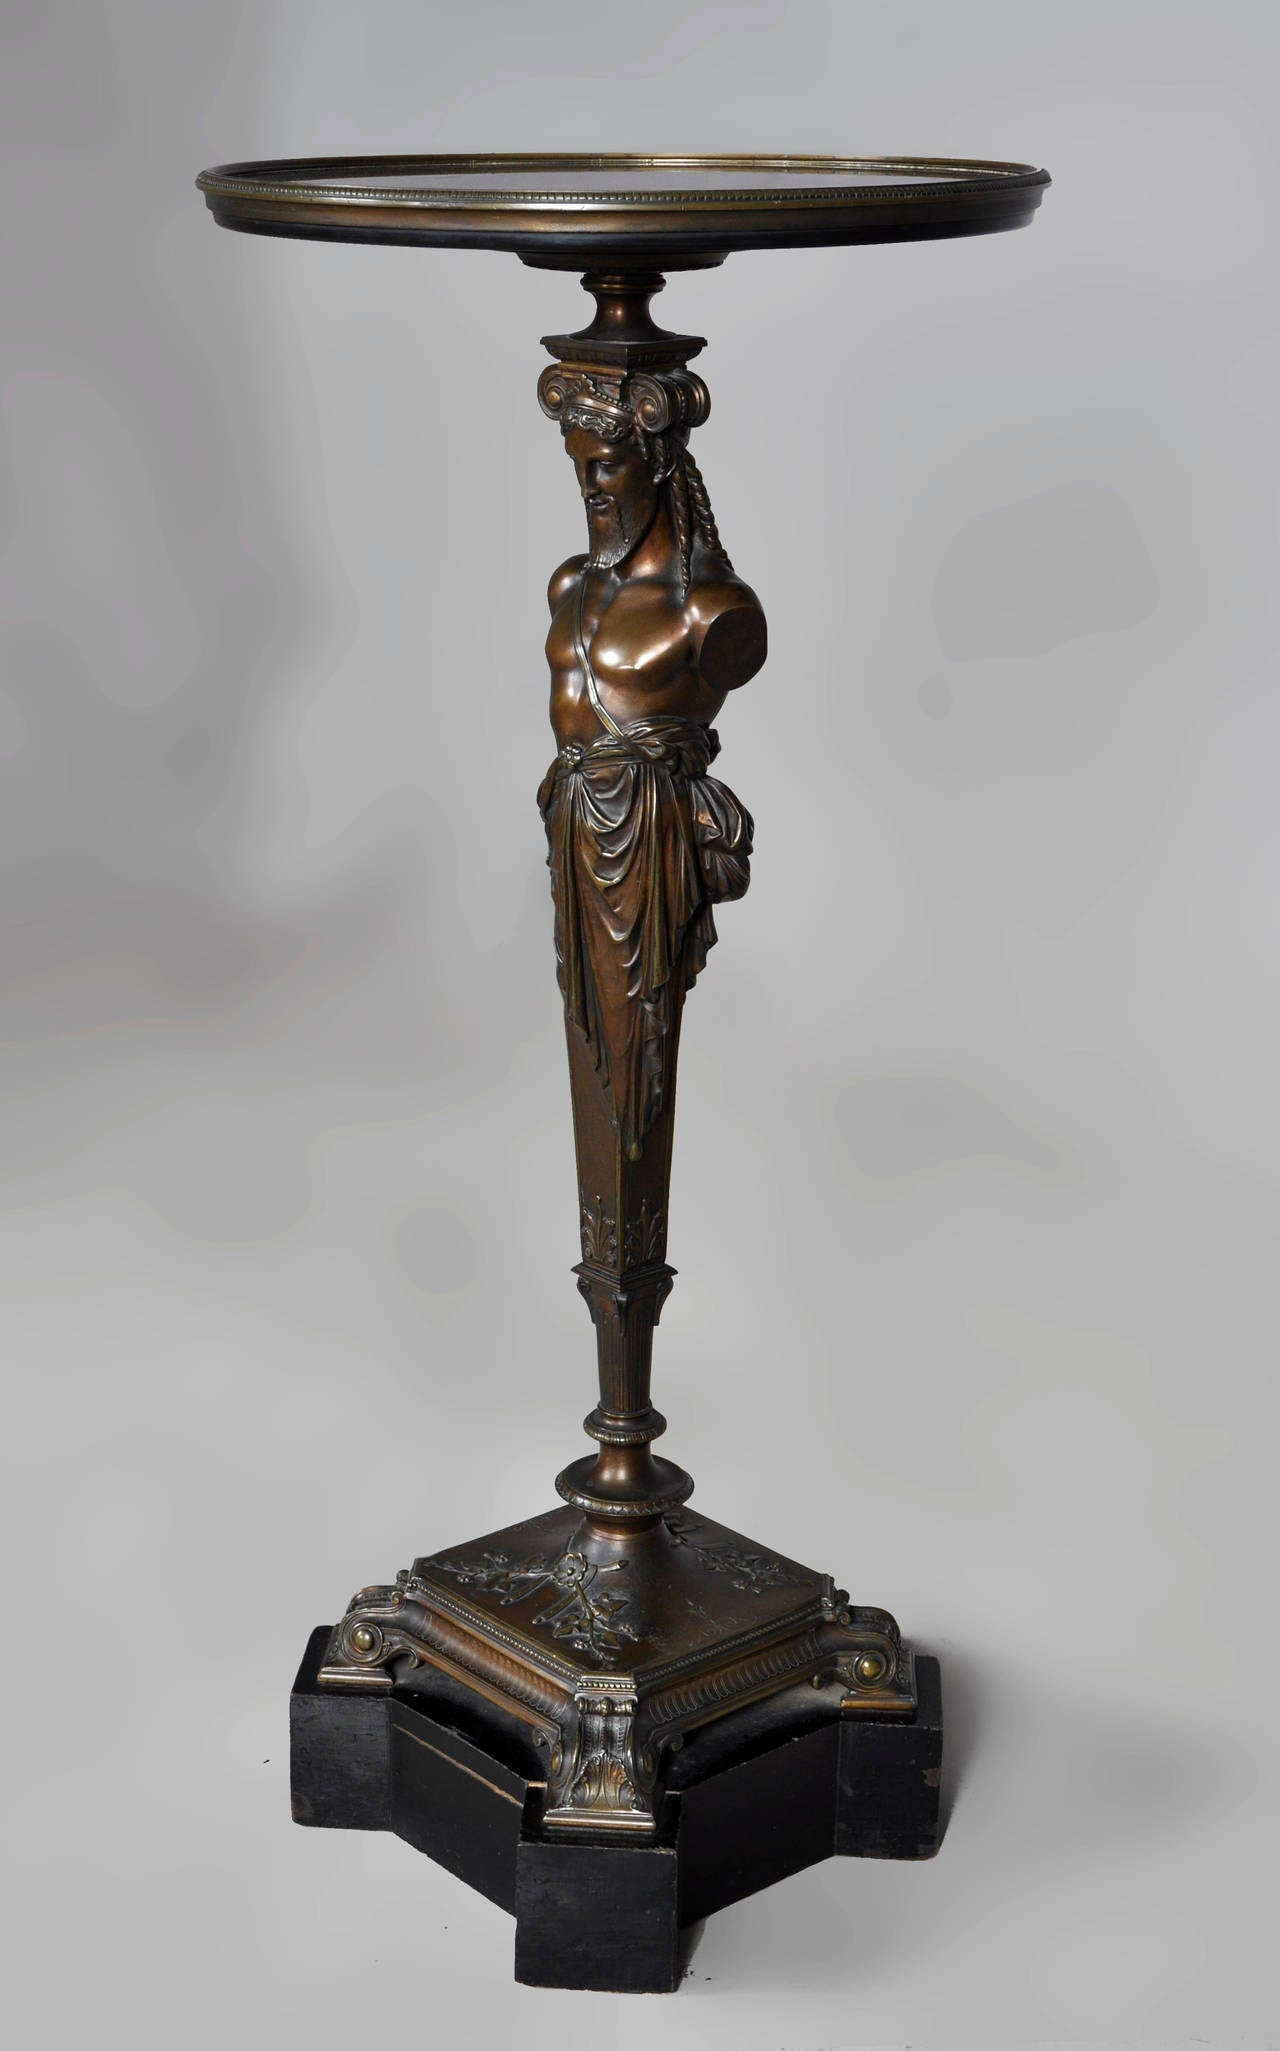 The central leg of this pedestal table figures the god Hermes, made out of brown patina bronze. the base of this table is made out of blackened wood. The top is realized in Black from Belgium marble. 
Beautiful quality of the bronze and chiseling.